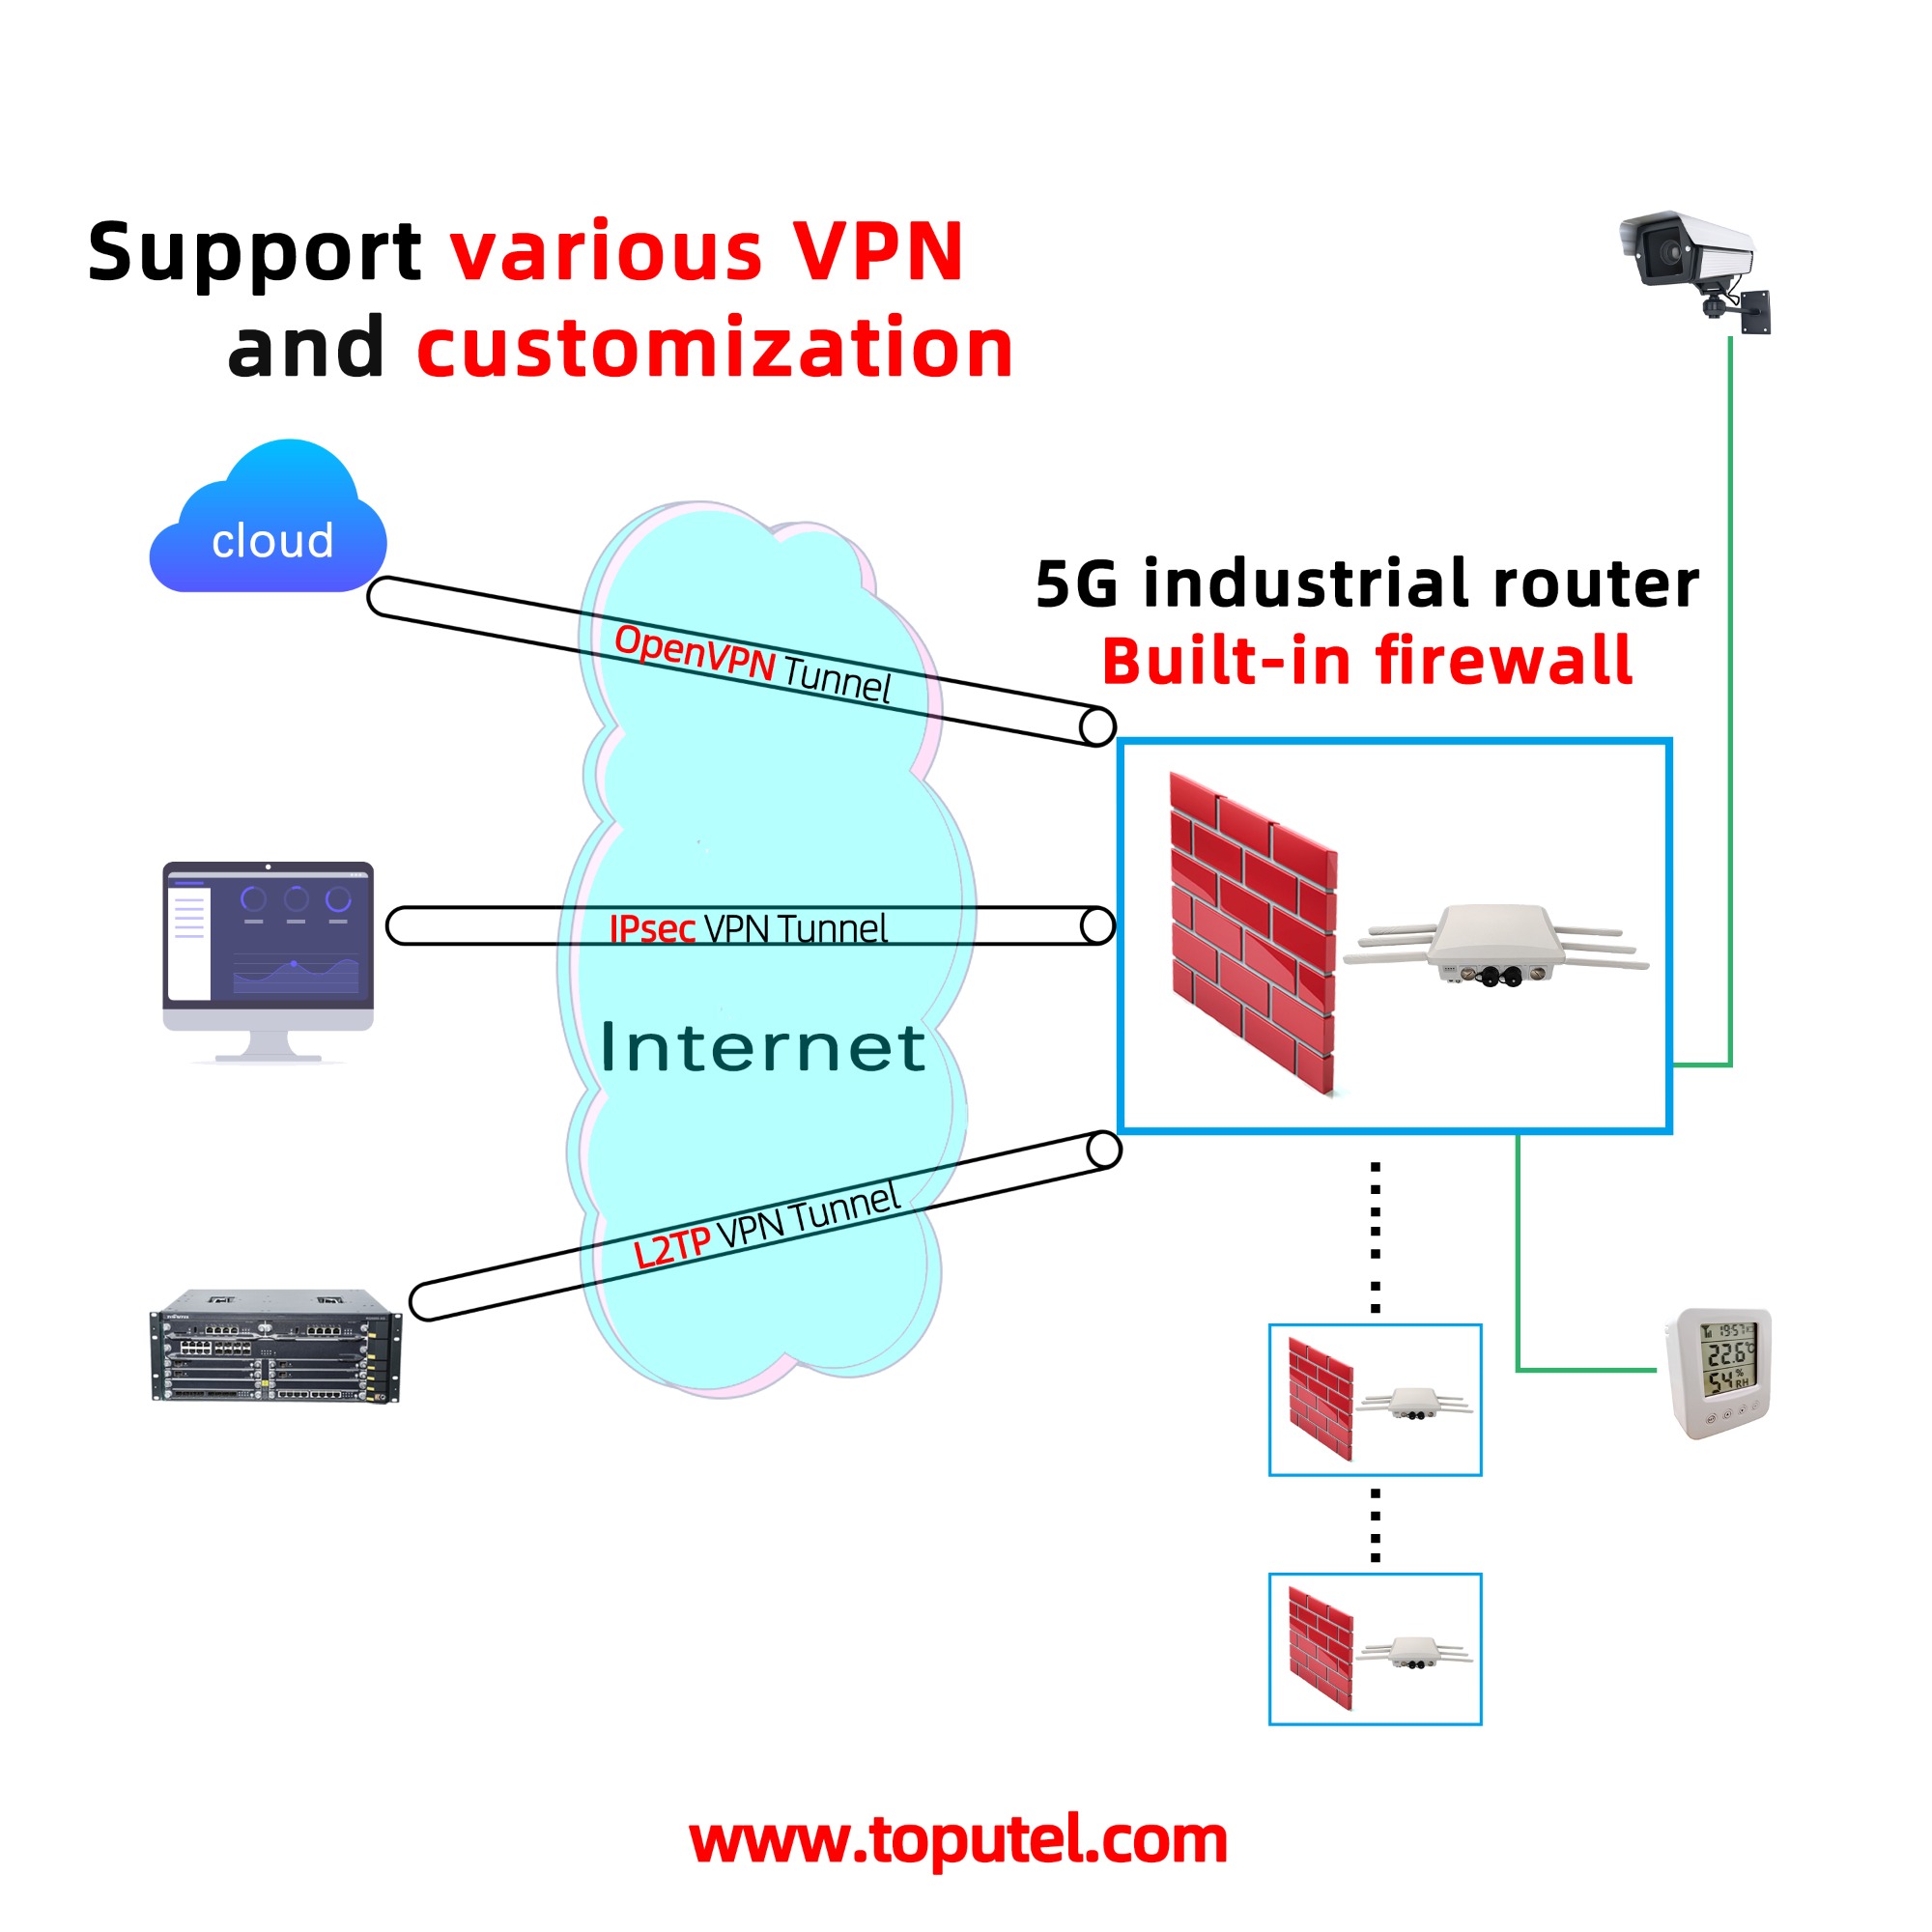 Built-in firewall and support various VPN and customization- 5G Industrial Router RG5000-OD 